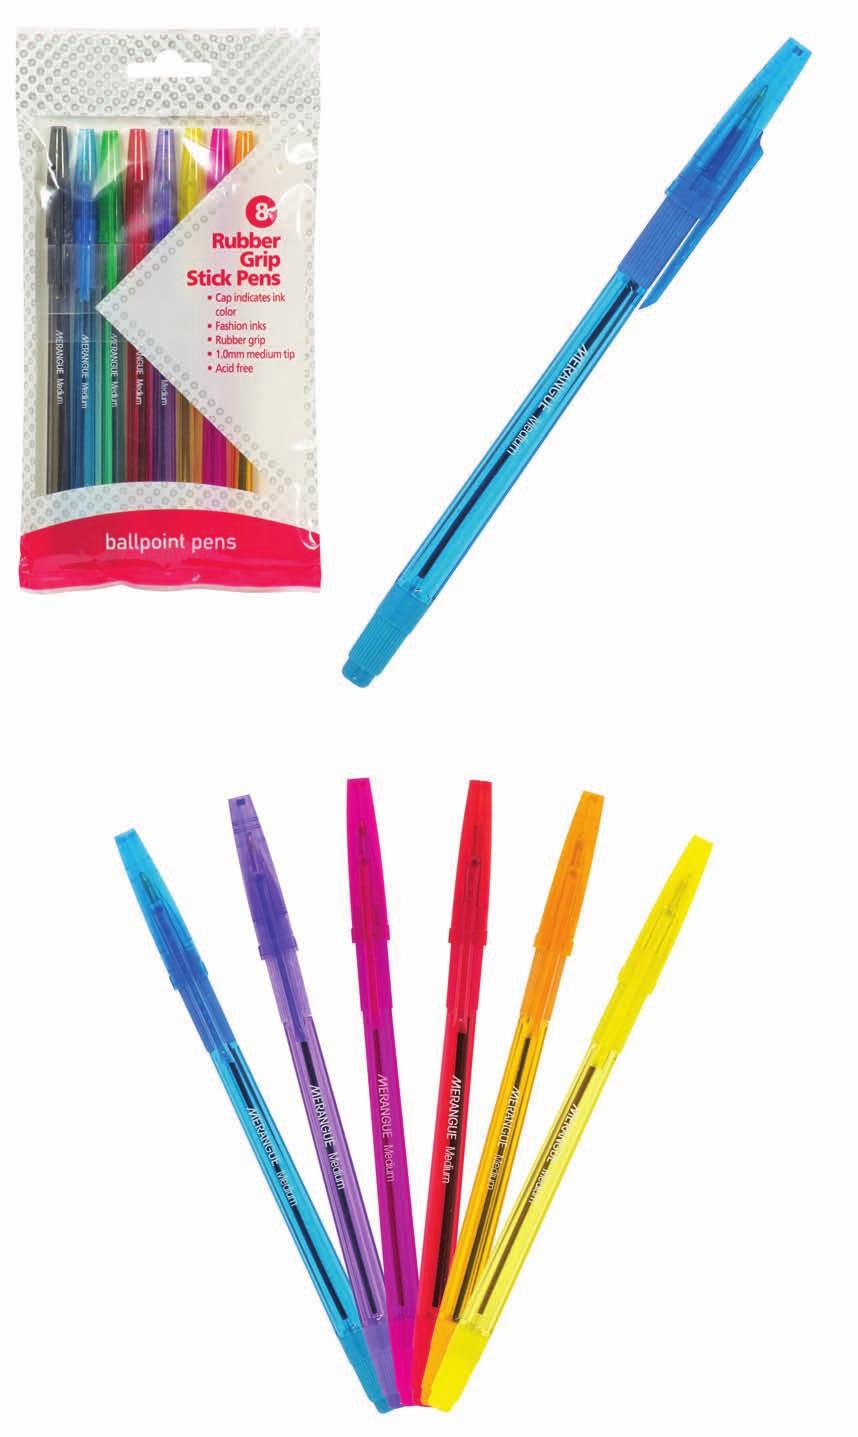 8PK RUBBER GRIP 38N2-7571-00-000 8 Pack Rubber Grip Fashion Ink Ballpoint Pens - Cap indicates ink color - 1.